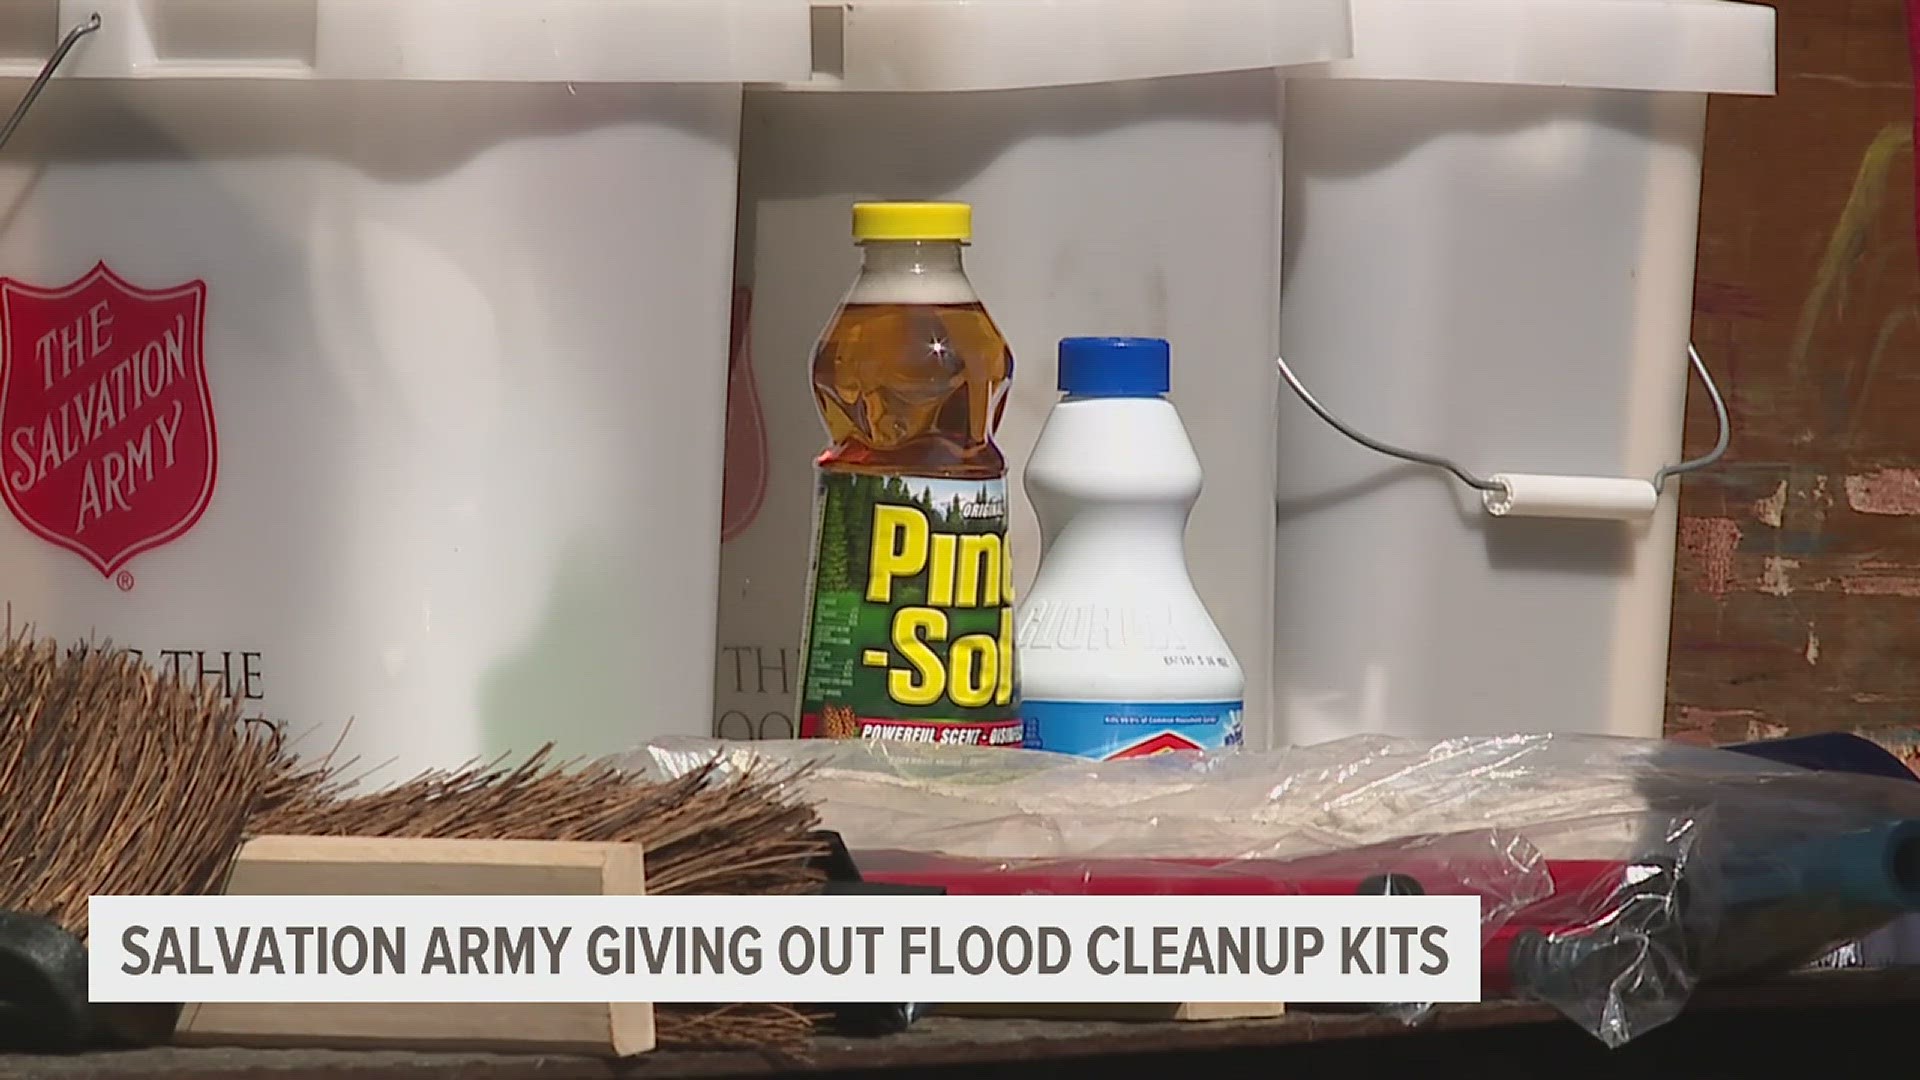 With thousands in the News 8 viewing area being affected by the flood, The Salvation Army is trying to help relieve some of the stresses of recovery.